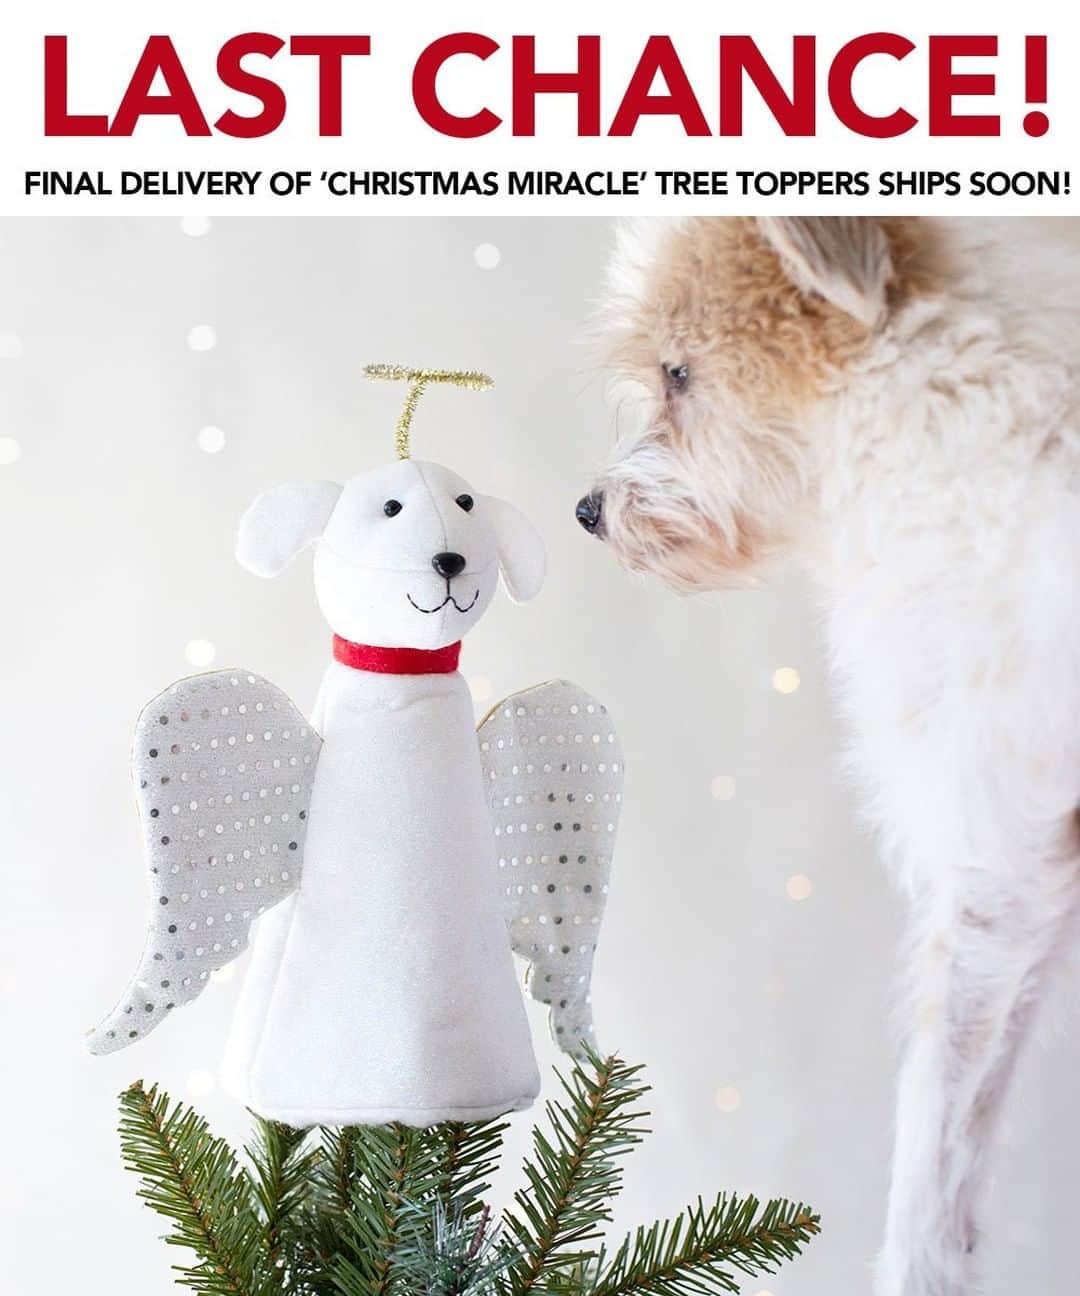 Animalsのインスタグラム：「Thanks to your support, our 'Christmas Miracle' Tree topper has funded over 200,000 meals for shelters!!! Is that a Christmas Miracle or what? Ok, so here's the deal... on 12/16 we'll receive our last shipment of these. If you place your order now, your order WILL ship in time for Christmas delivery. Thanks again for all your support! Buy link in @iheartdogscom bio. Each purchase funds 30 meals!」